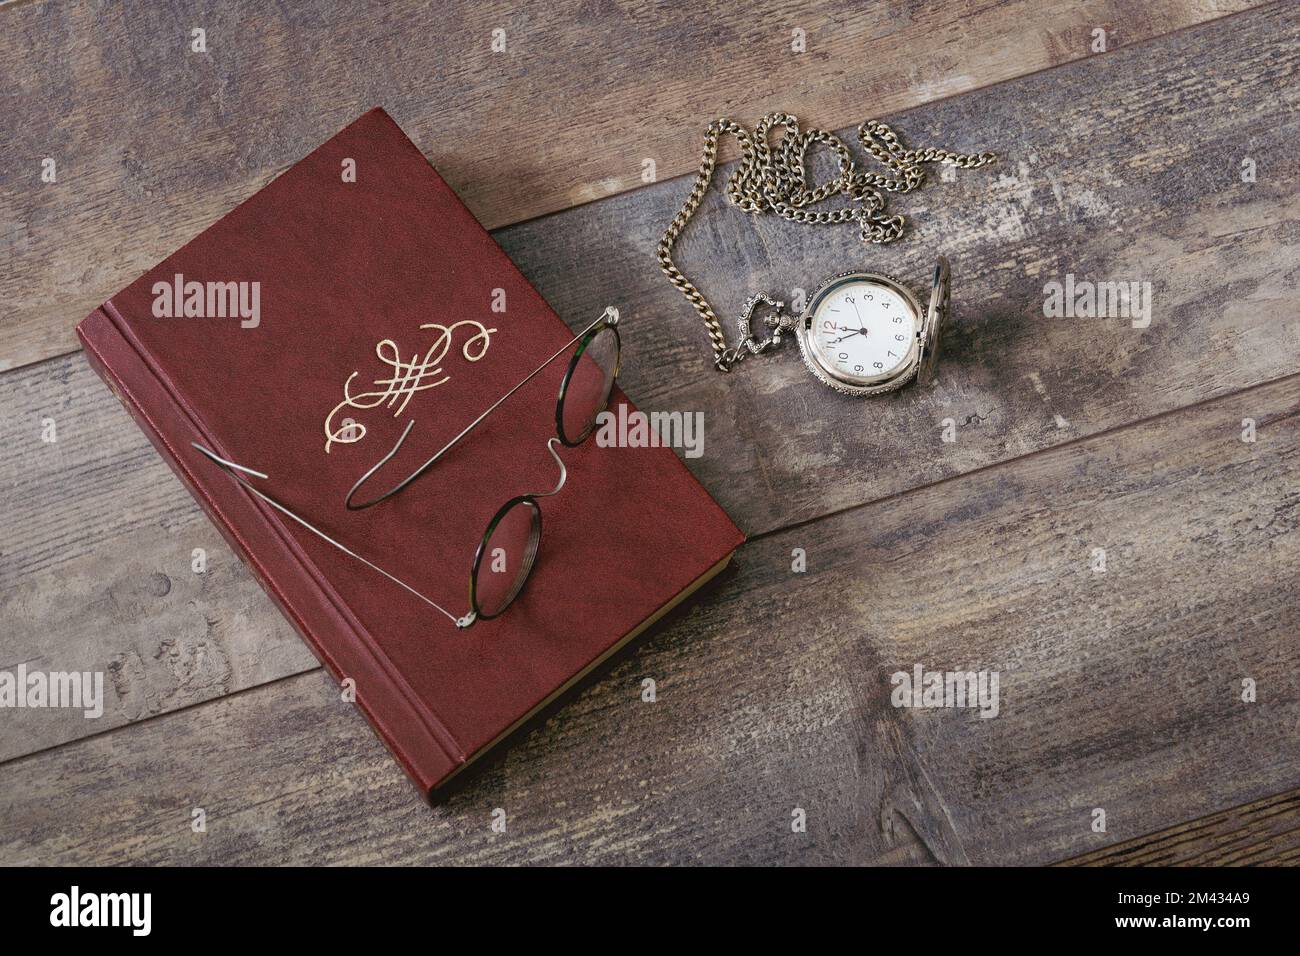 Old book, glasses and pocket watch on a textured table. Old fashioned still life Stock Photo